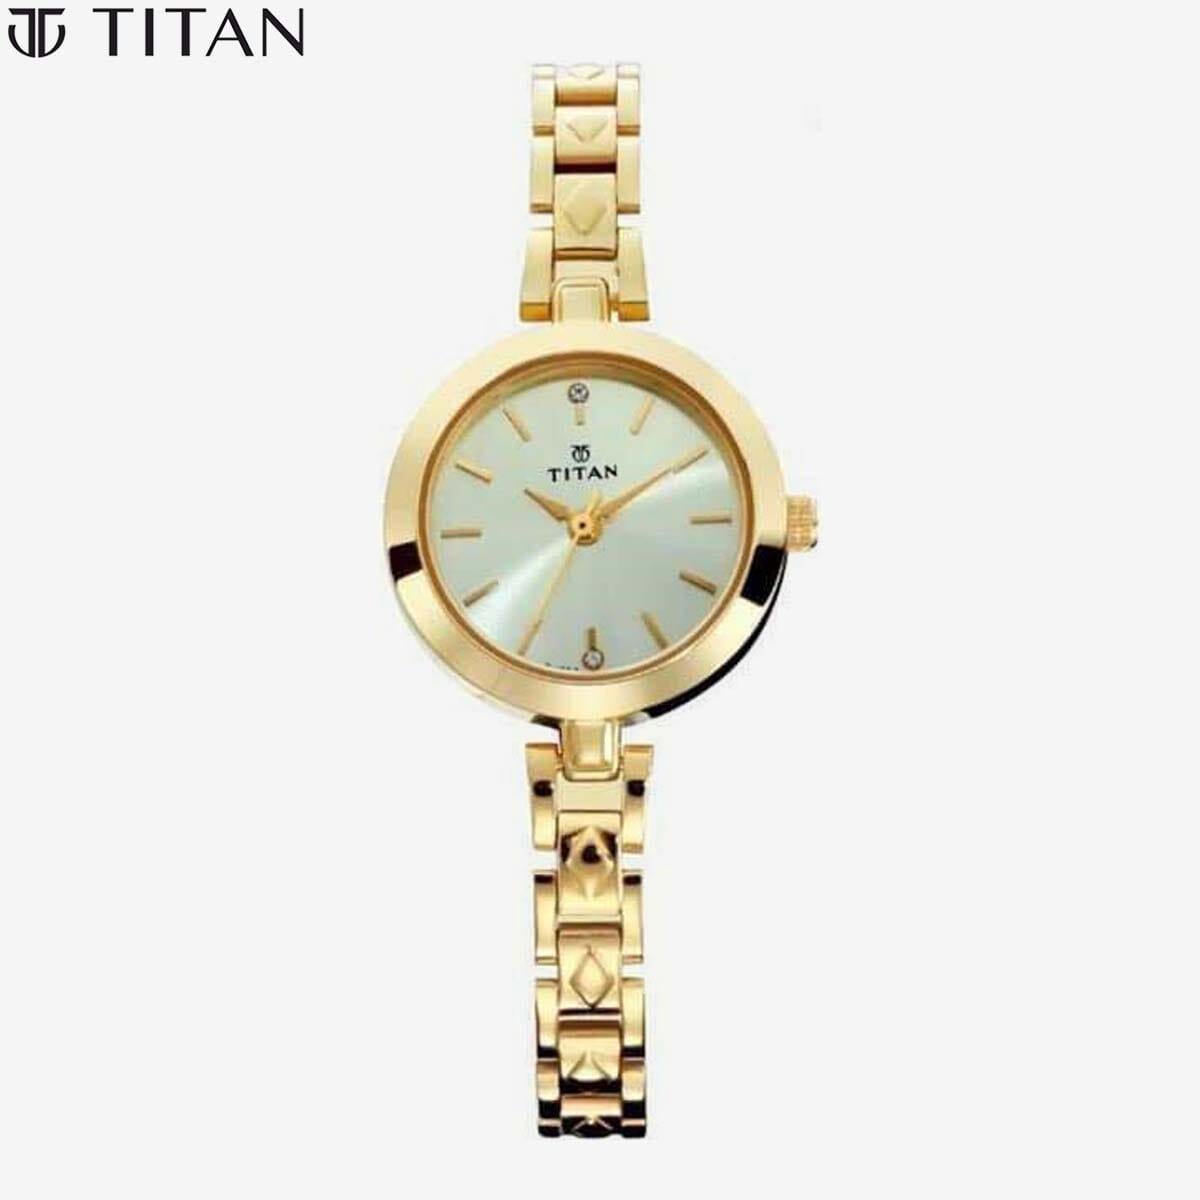 Titan Black Watches For Womens | vlr.eng.br